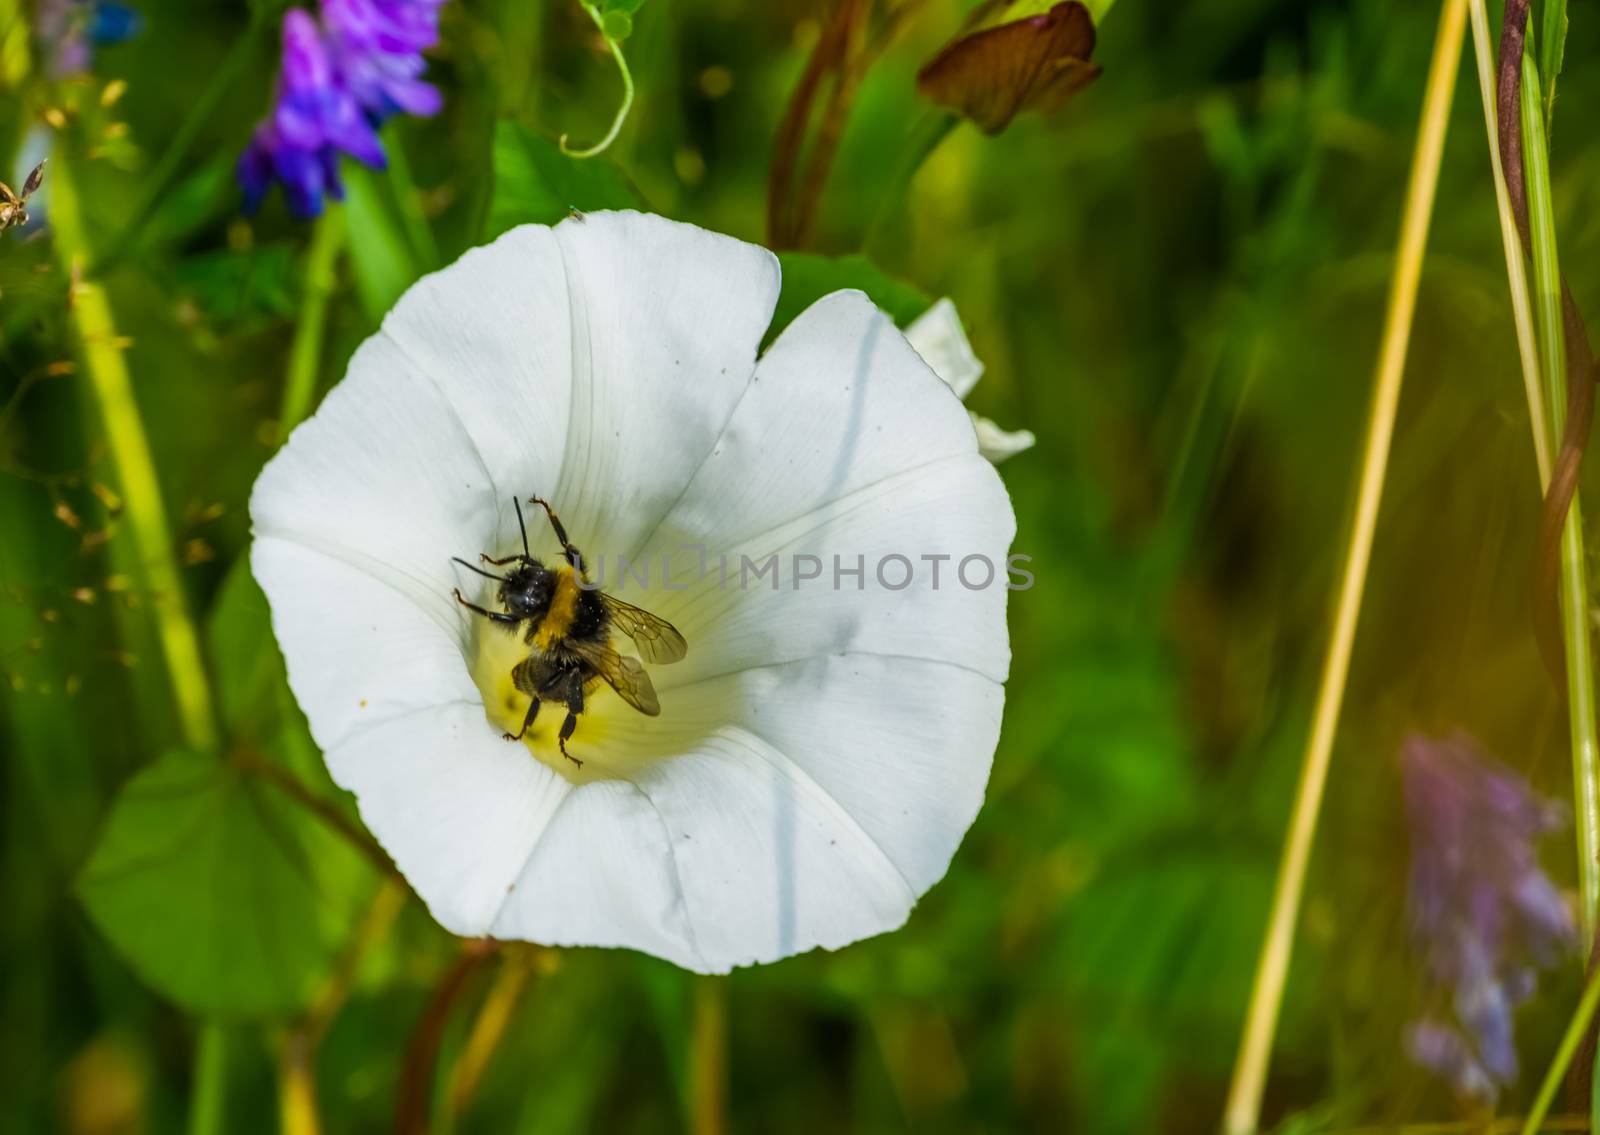 Closeup of a bee pollinating a heavenly trumpet flower, insect behavior, nature background by charlottebleijenberg